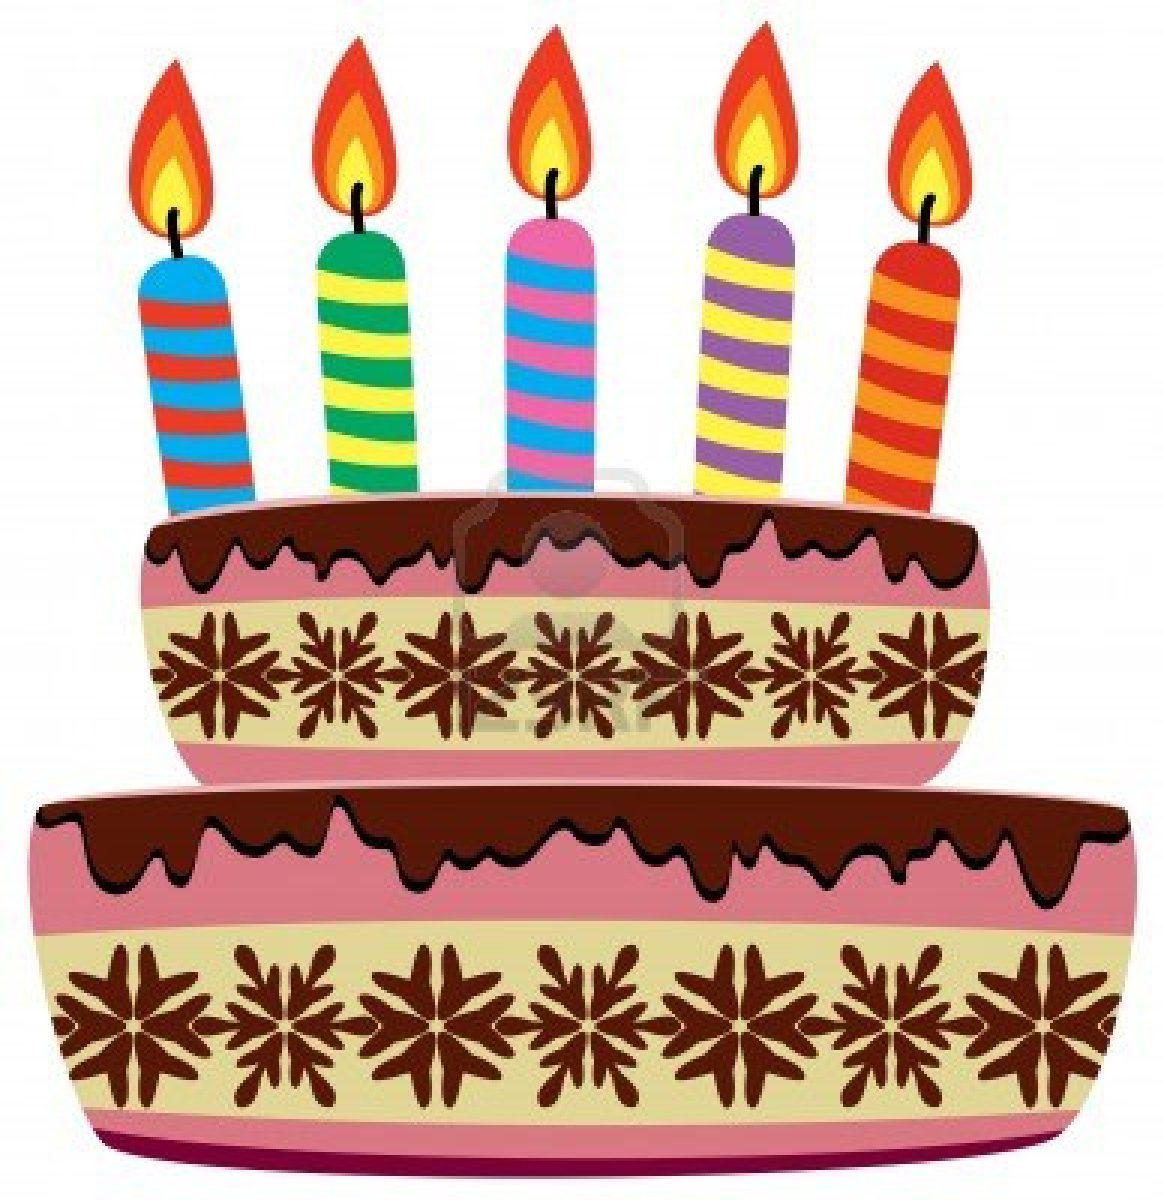 Happy birthday cake with candles clipart